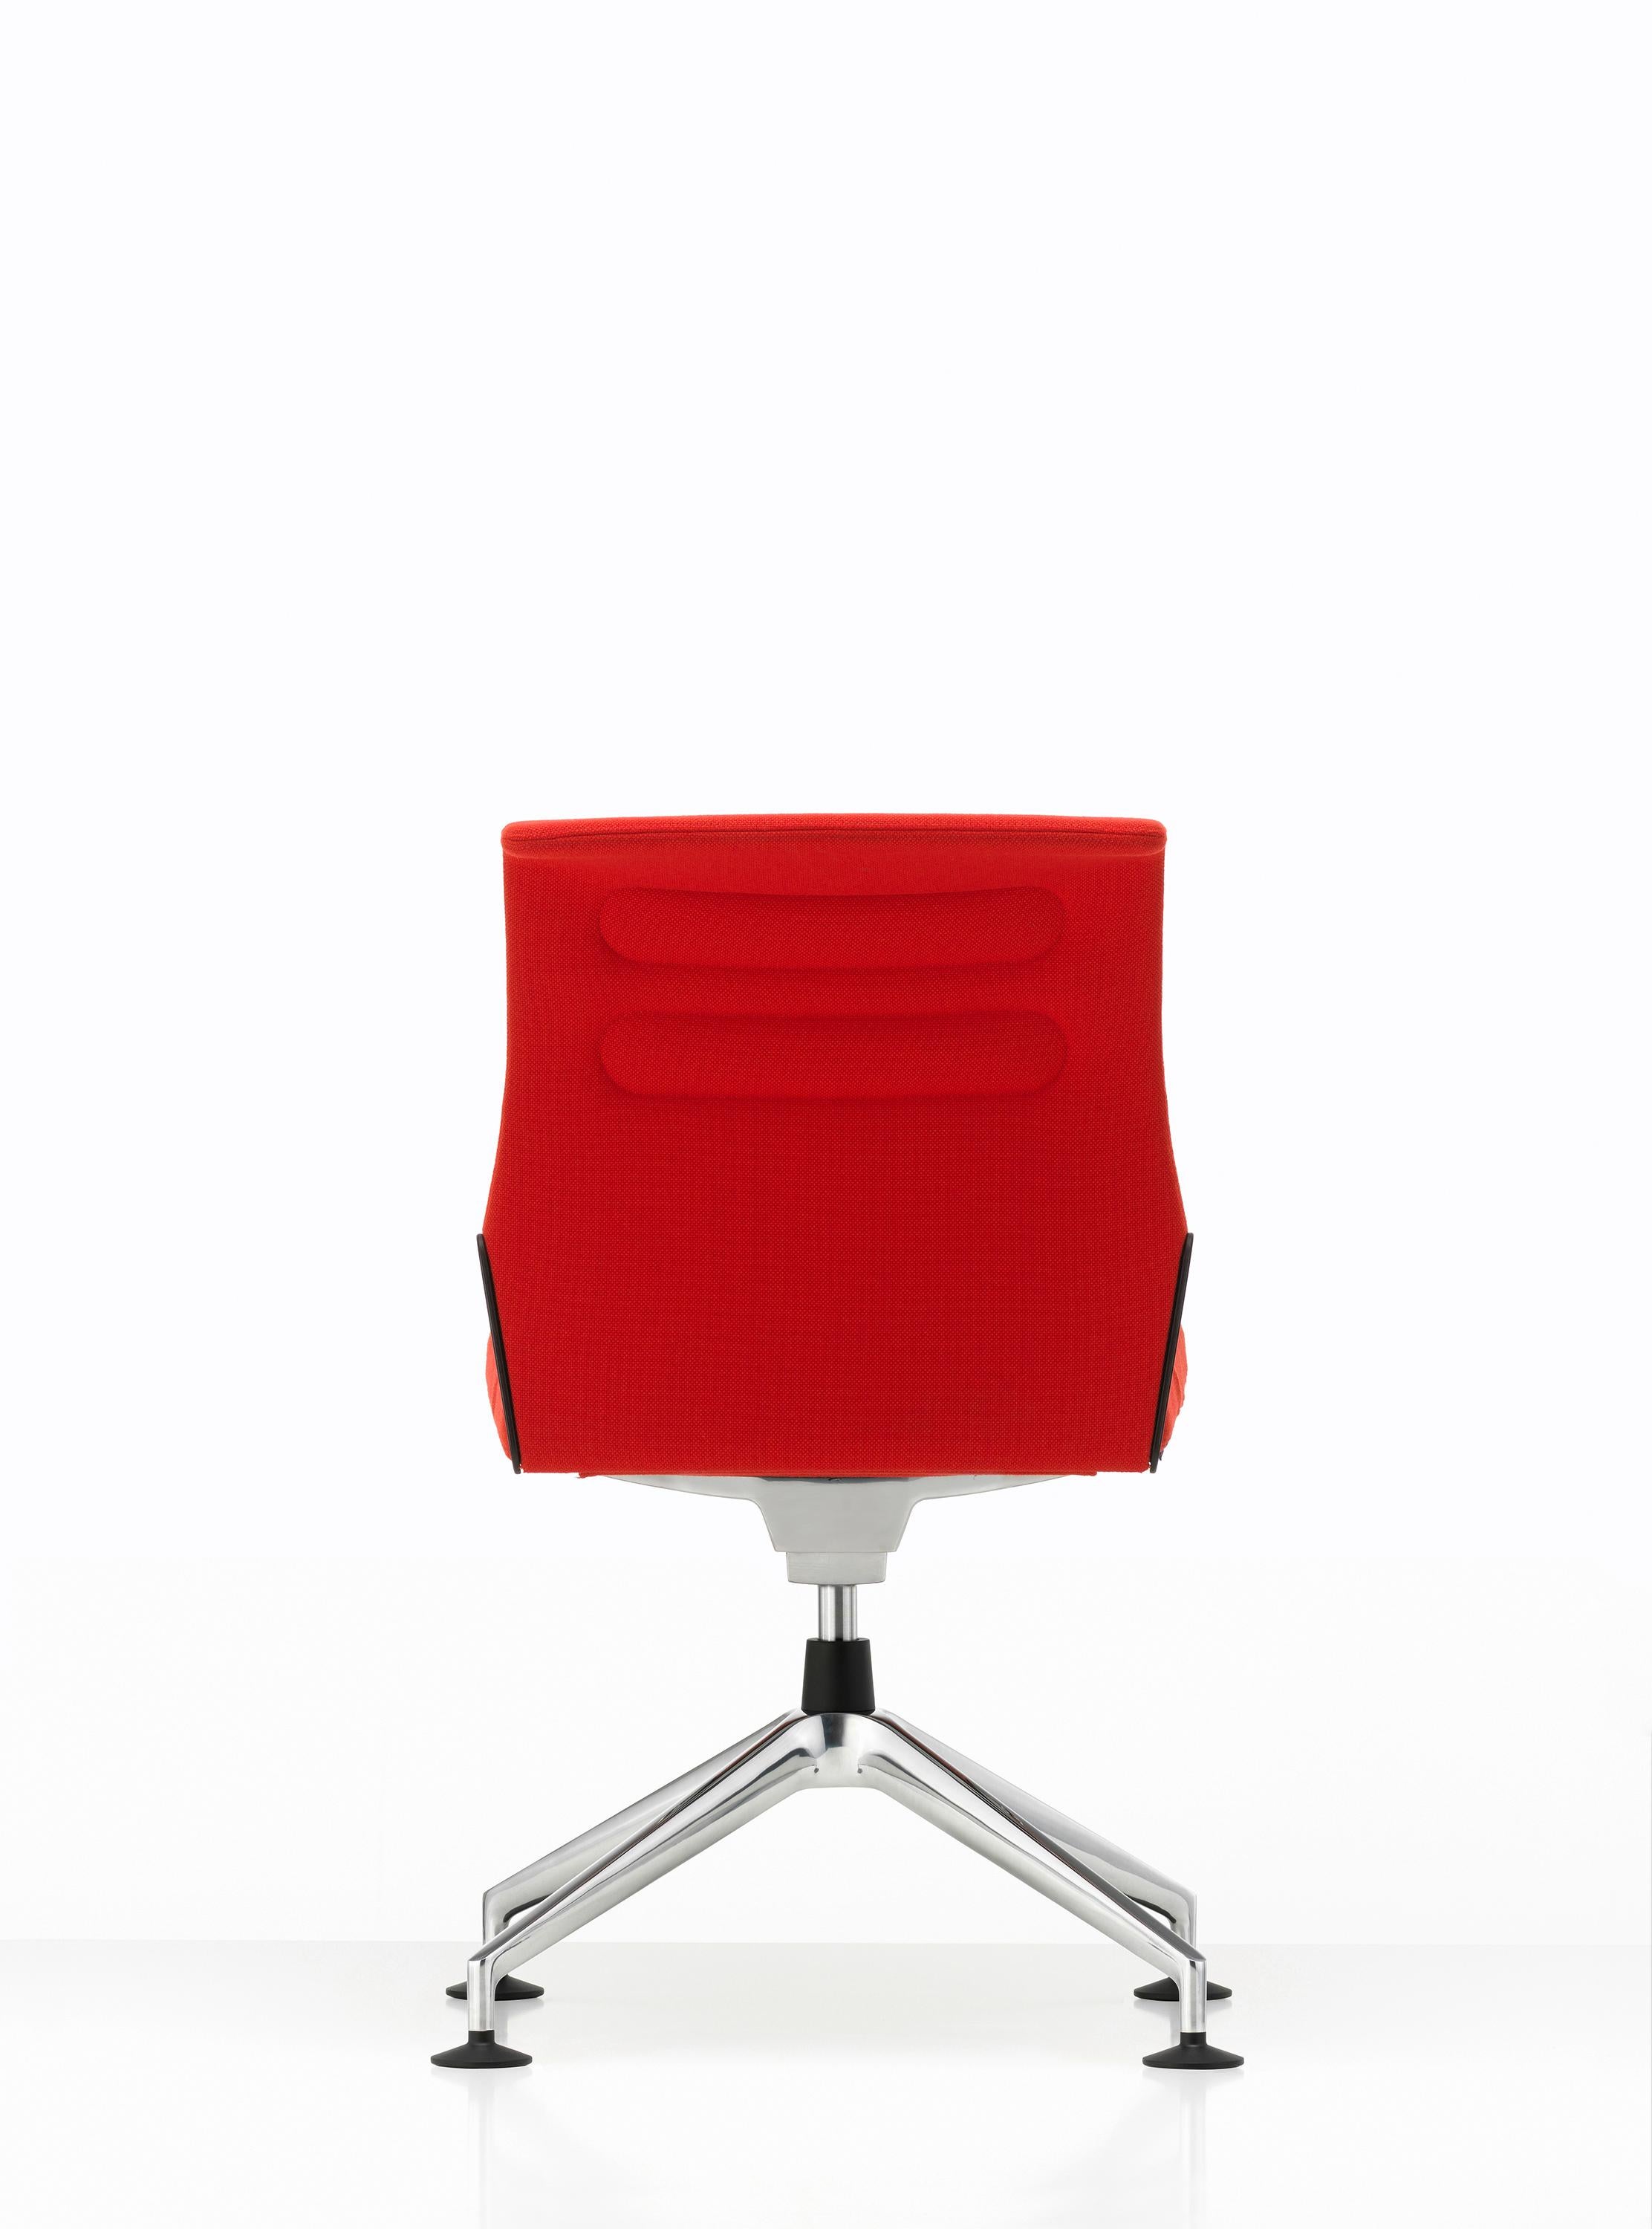 These items are currently only available in the United States.

AC 5 Meet is the Classic conference chair in the AC 5 Group office chair family. Thanks to an understated elegant design and use of high-quality materials, it cuts a Fine figure in both